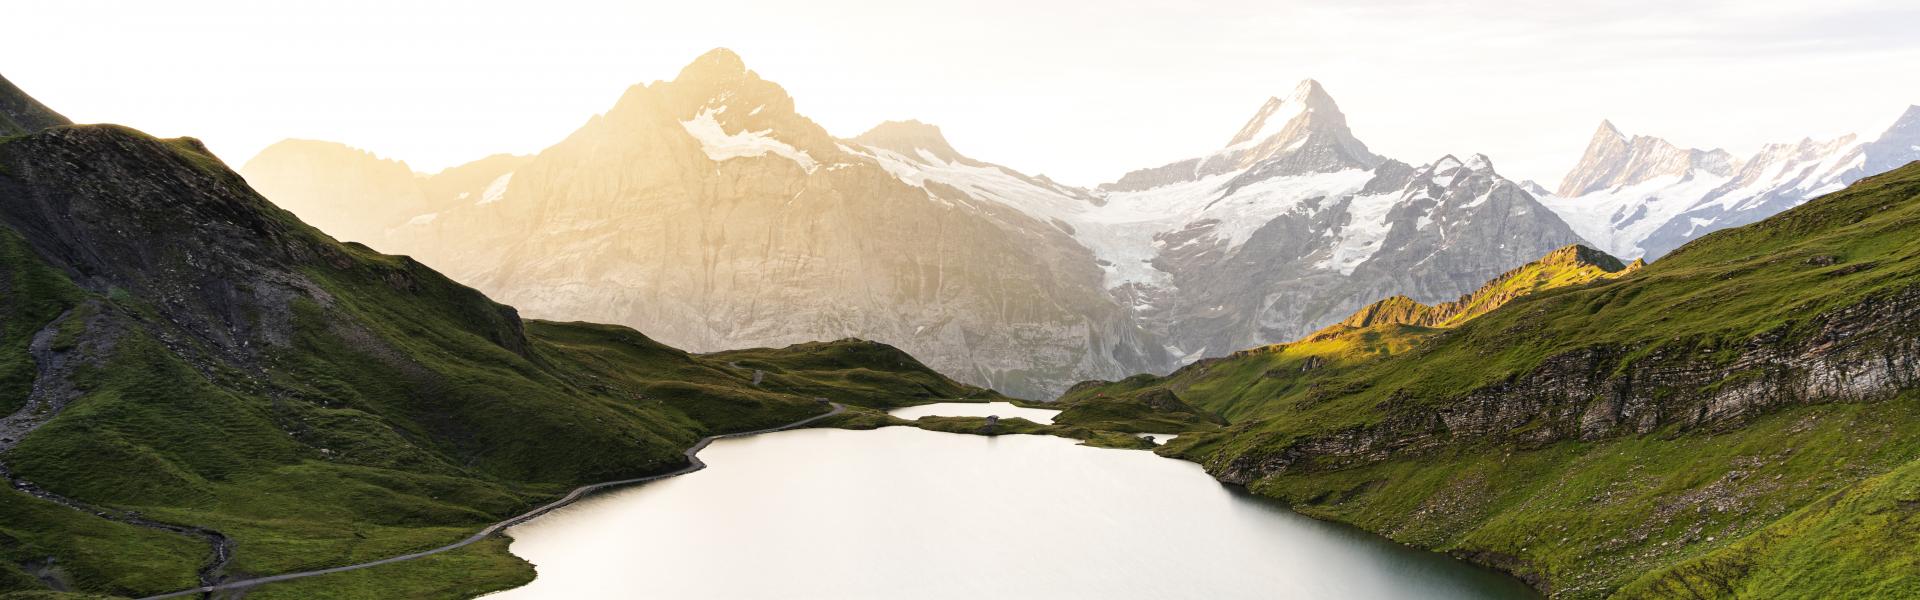 High angle view of hiker man walking at Bachalpsee lake during a misty sunrise, Grindelwald, Bernese Oberland, Bern Canton, Switzerland